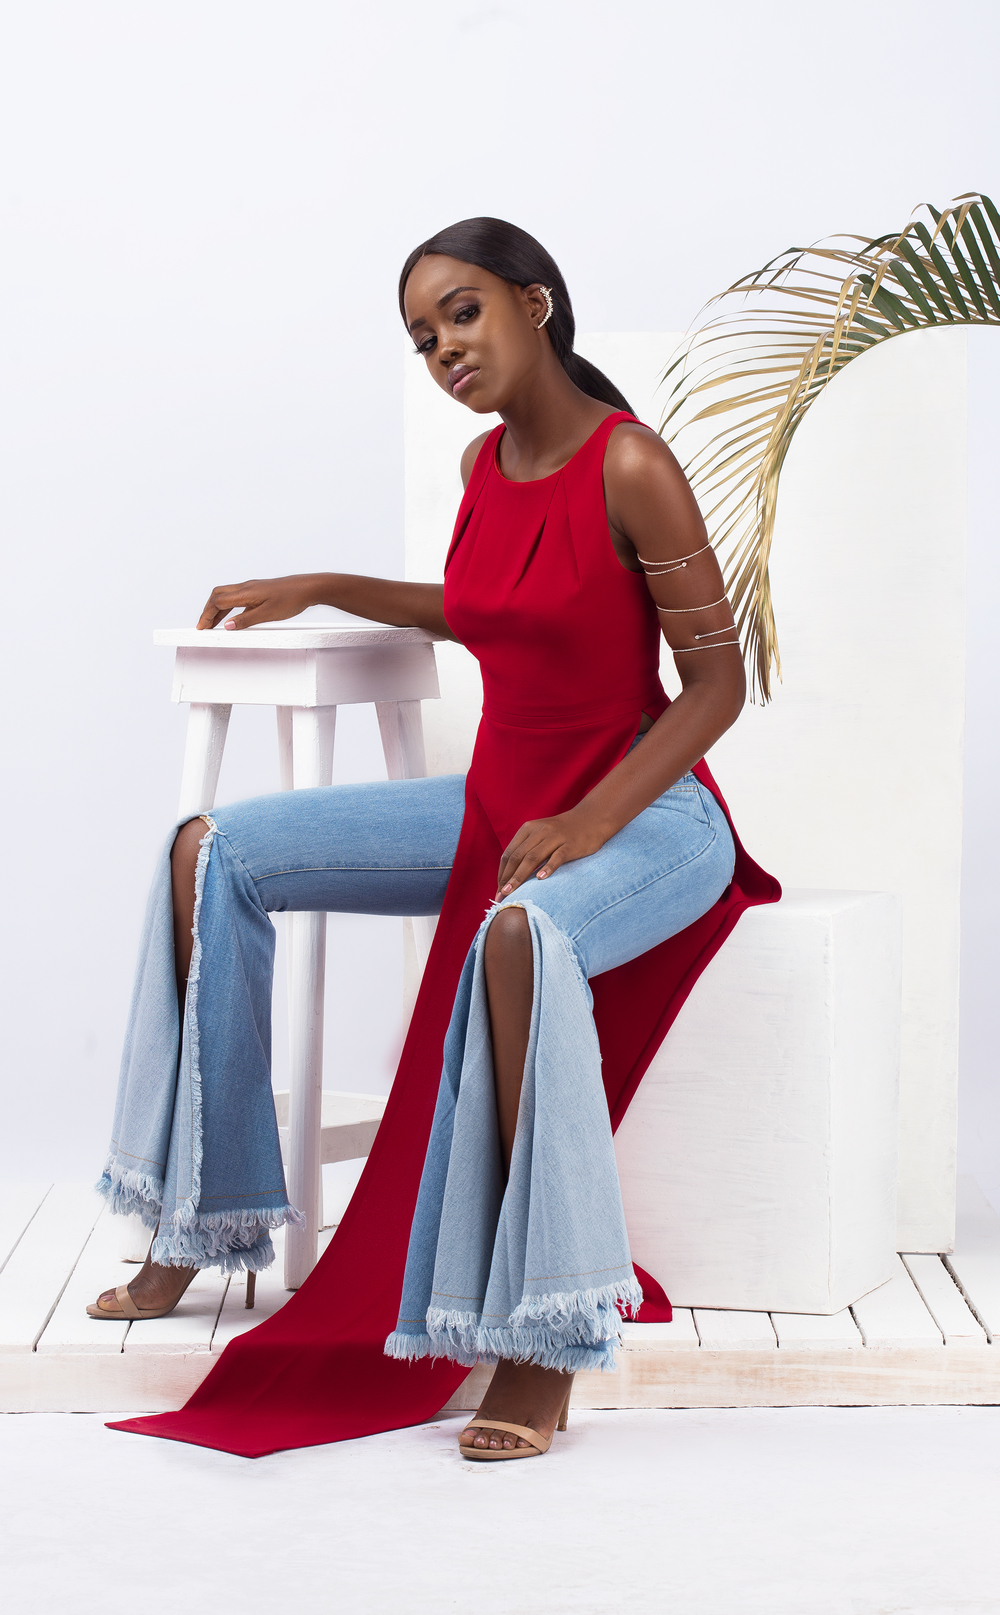 Femme By Yele launches it SS17 Campaign which focuses on the Urban Woman 